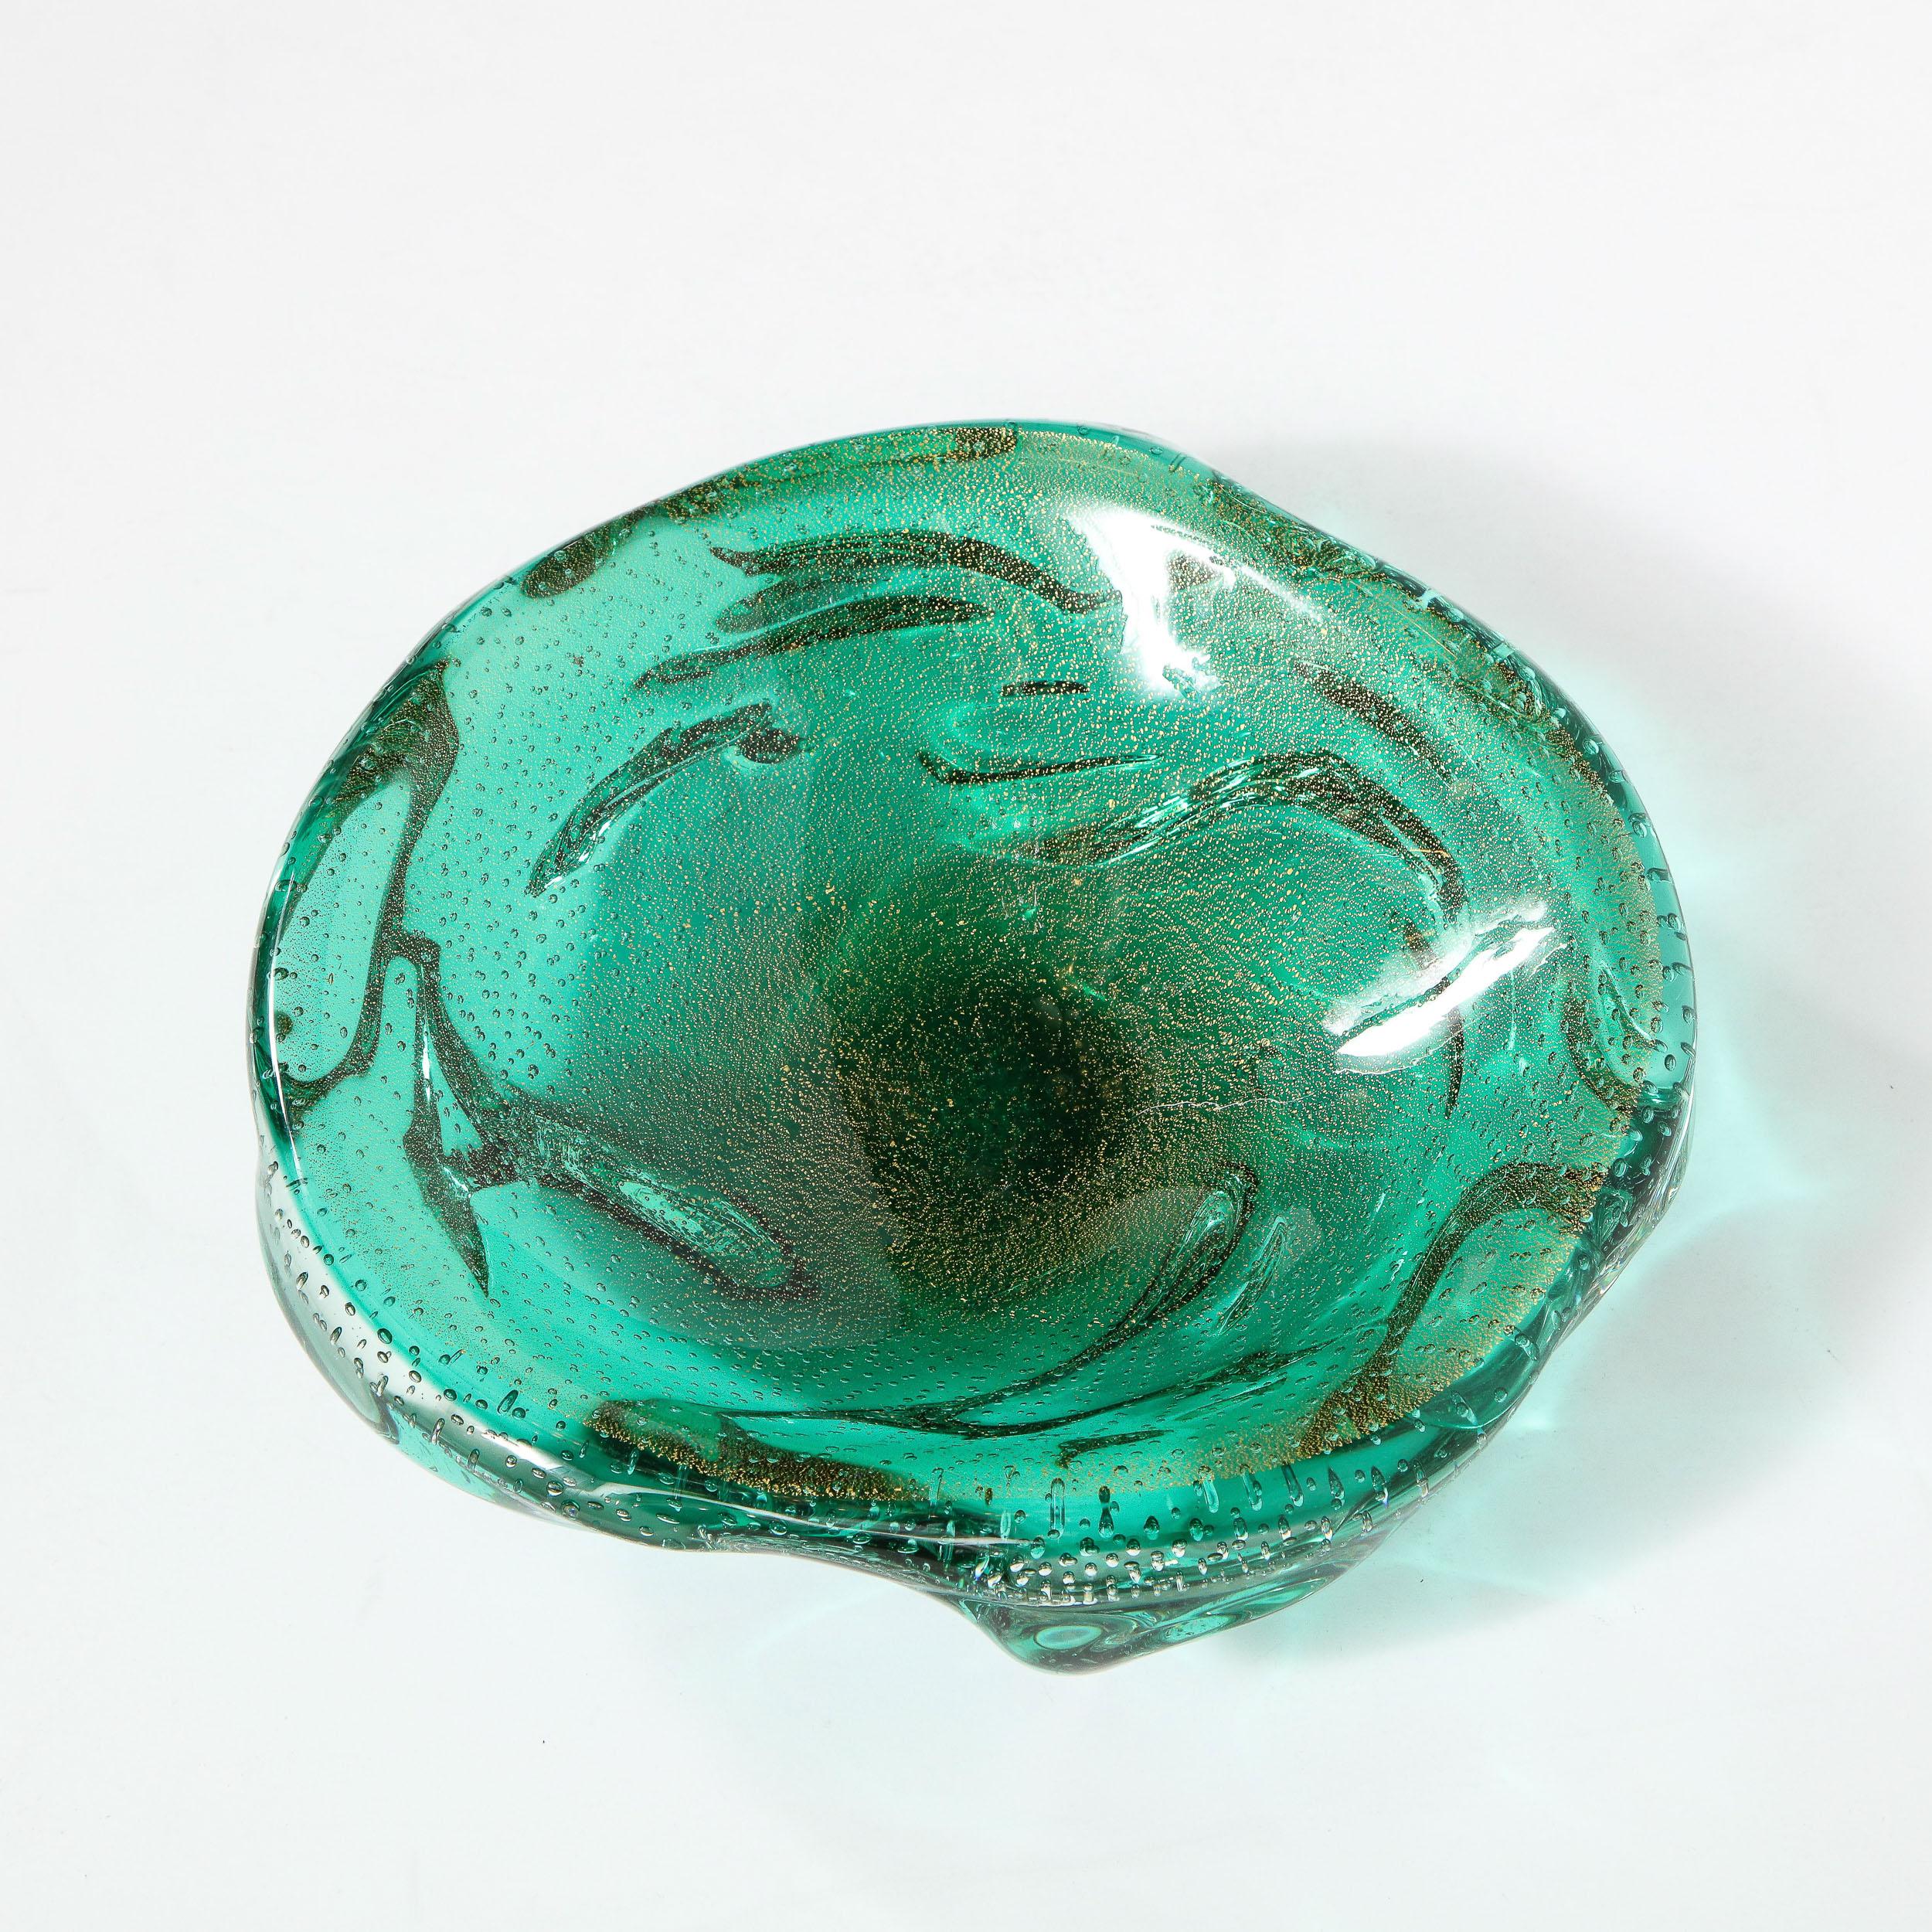 This elegant Mid-Century Modern bowl was realized in Italy, circa 1950. It features a sculptural silhouette composed of hand blown Murano glass in a rich sea foam teal hue with translucent murines and 24-karat yellow gold flecks throughout. With its